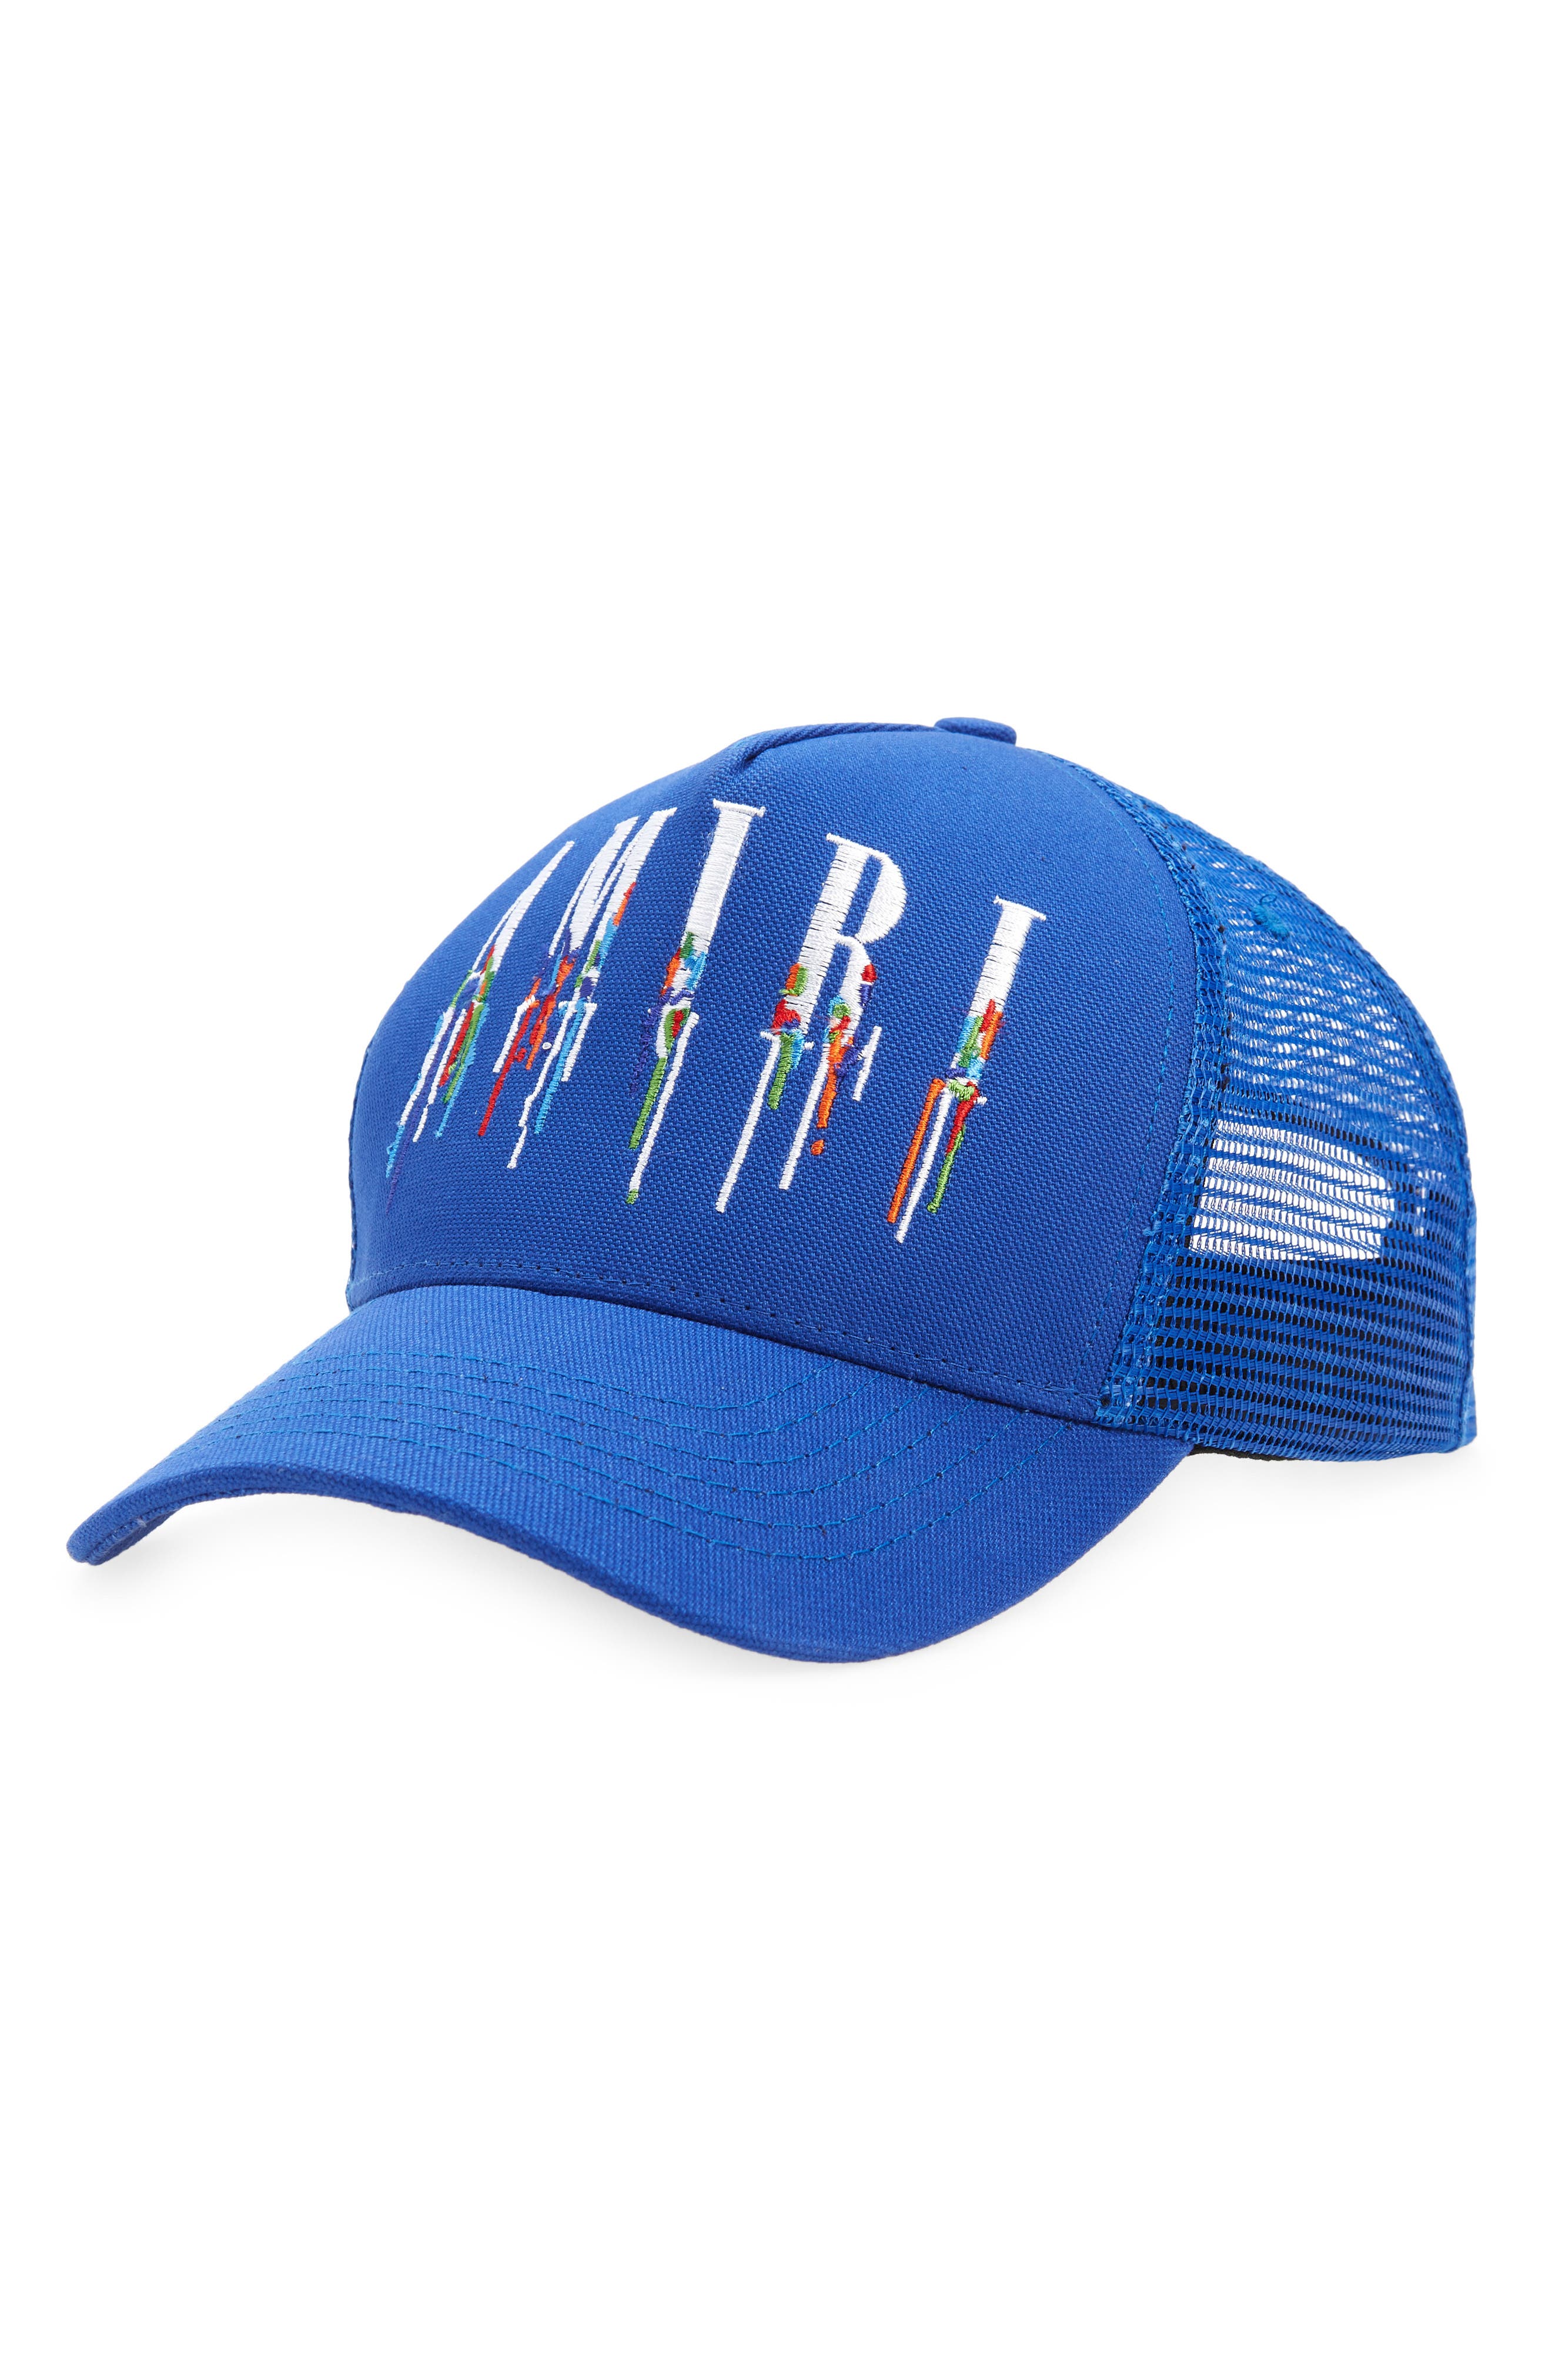 AMIRI Paint Drip Embroidered Logo Trucker Hat in Princess Blue at Nordstrom